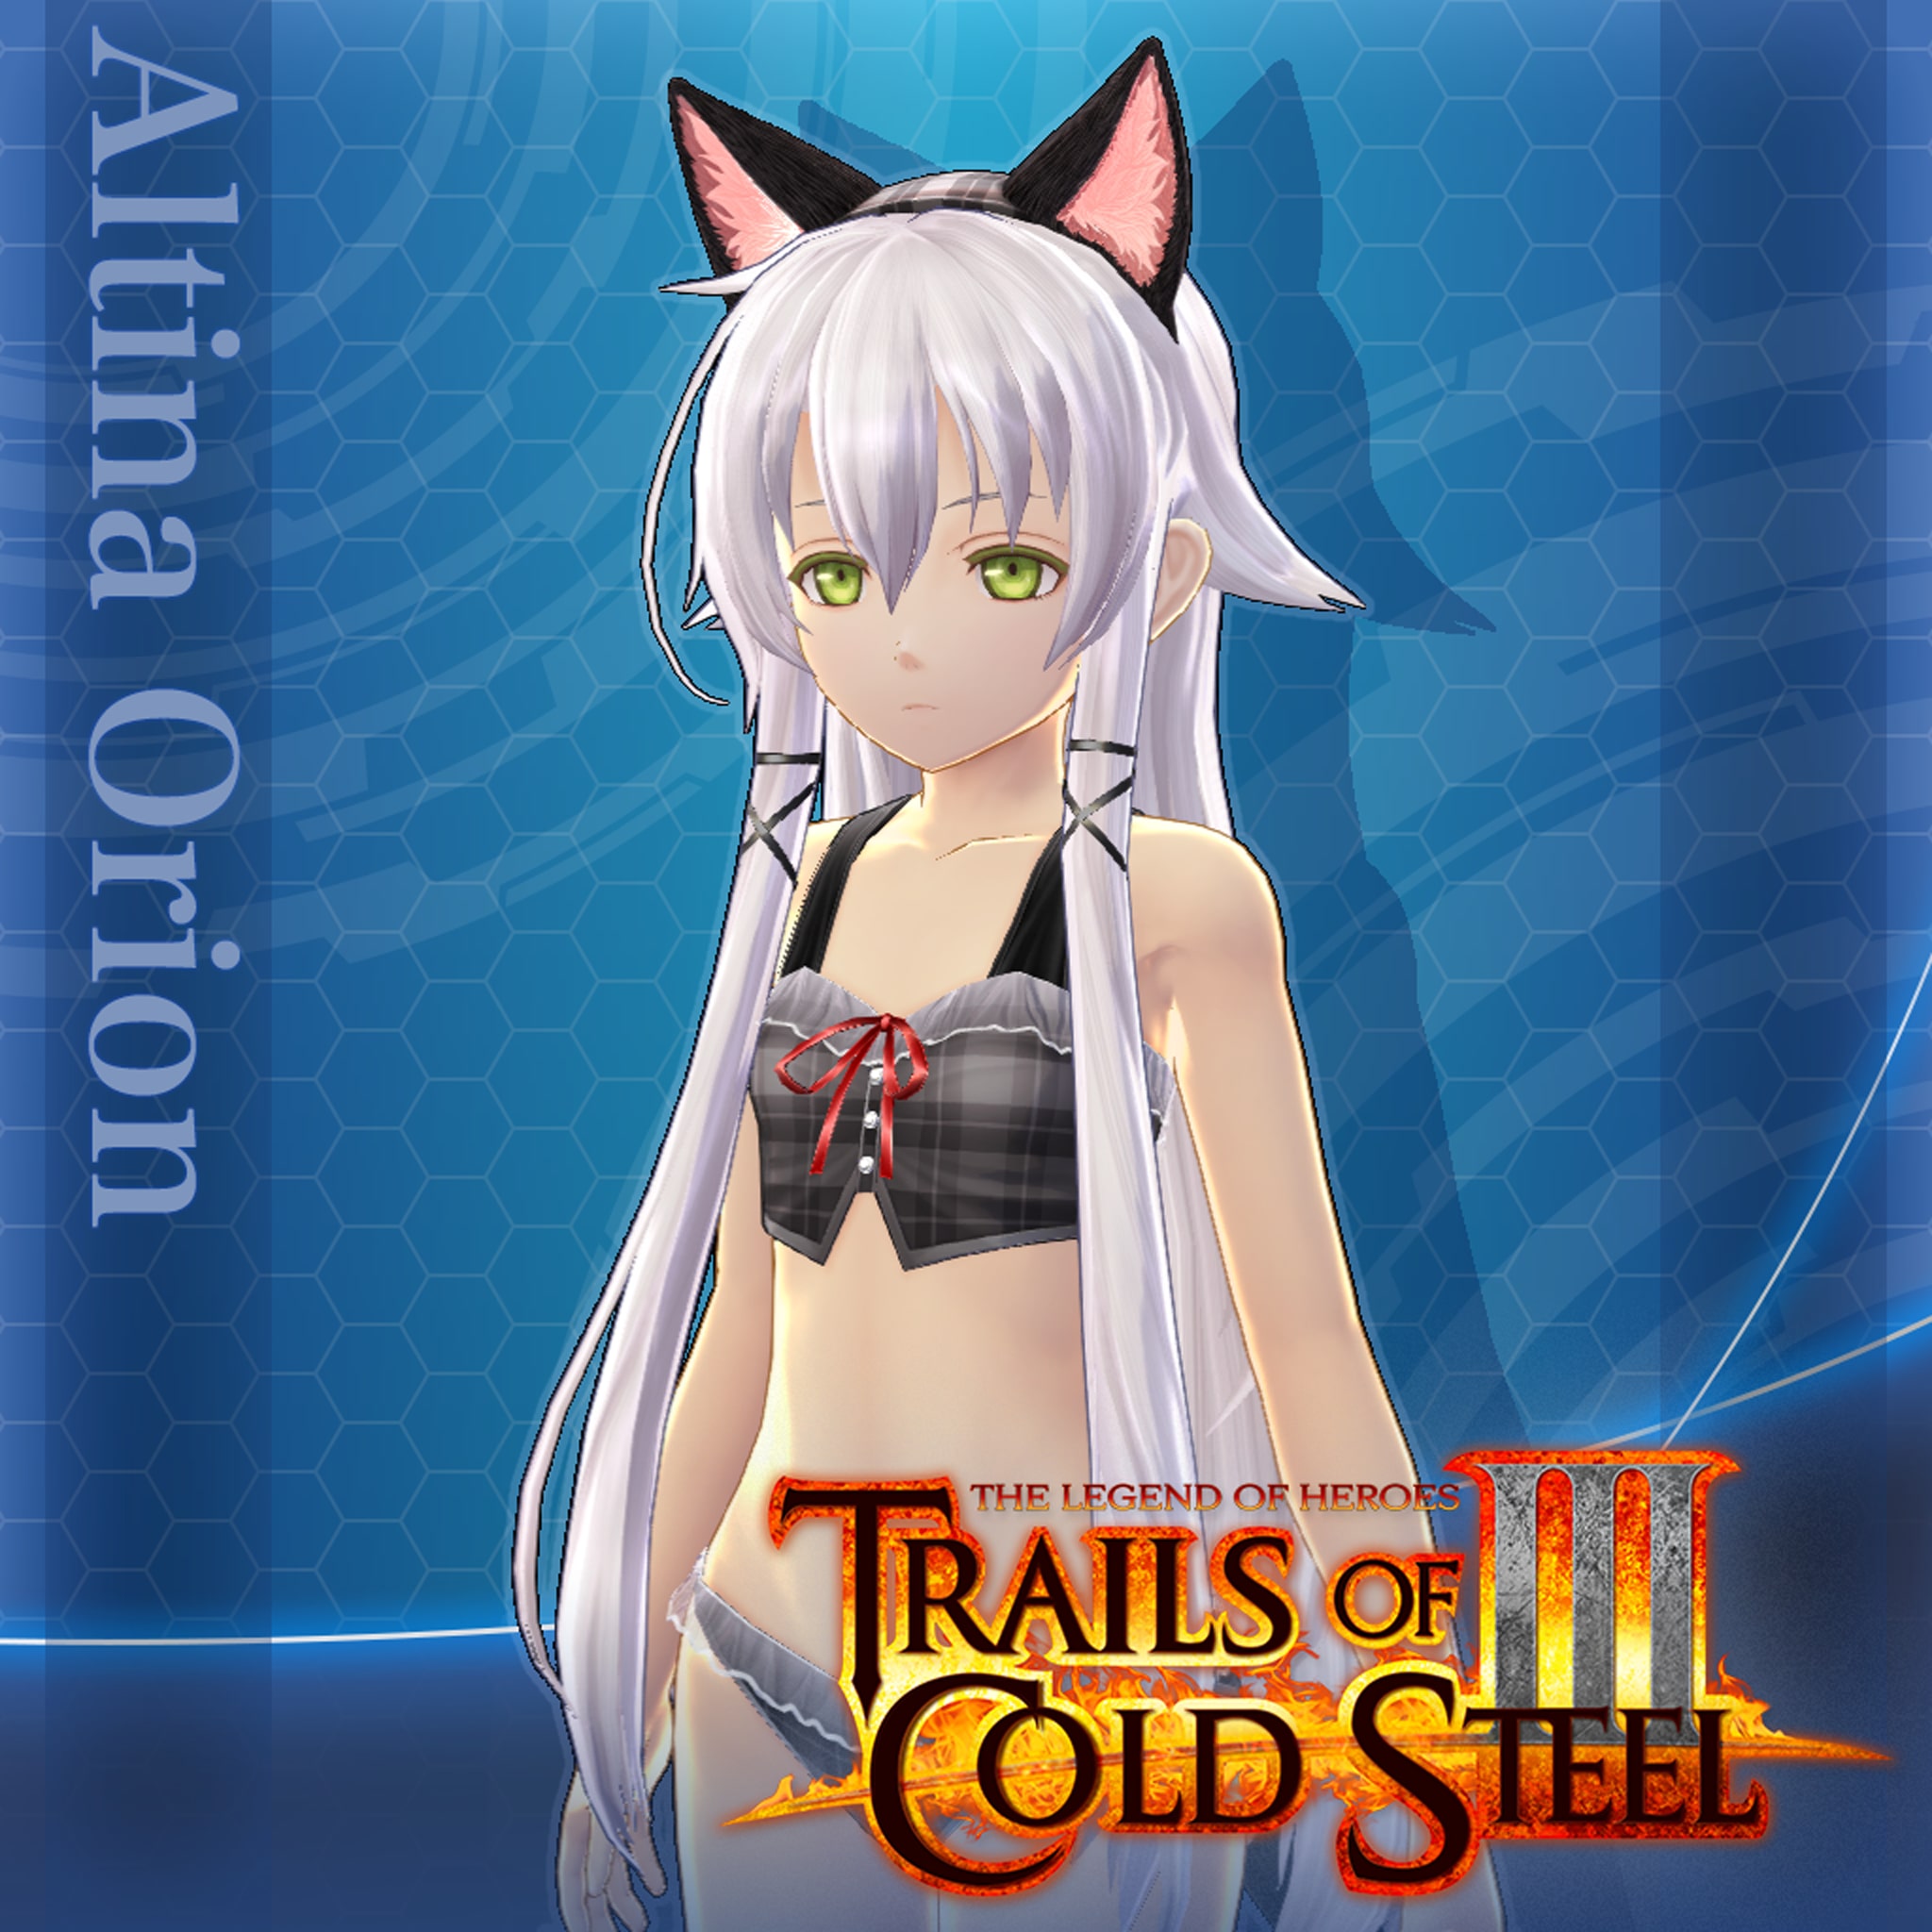 Trails of Cold Steel III: Altina's 'Kitty Noir' Costume